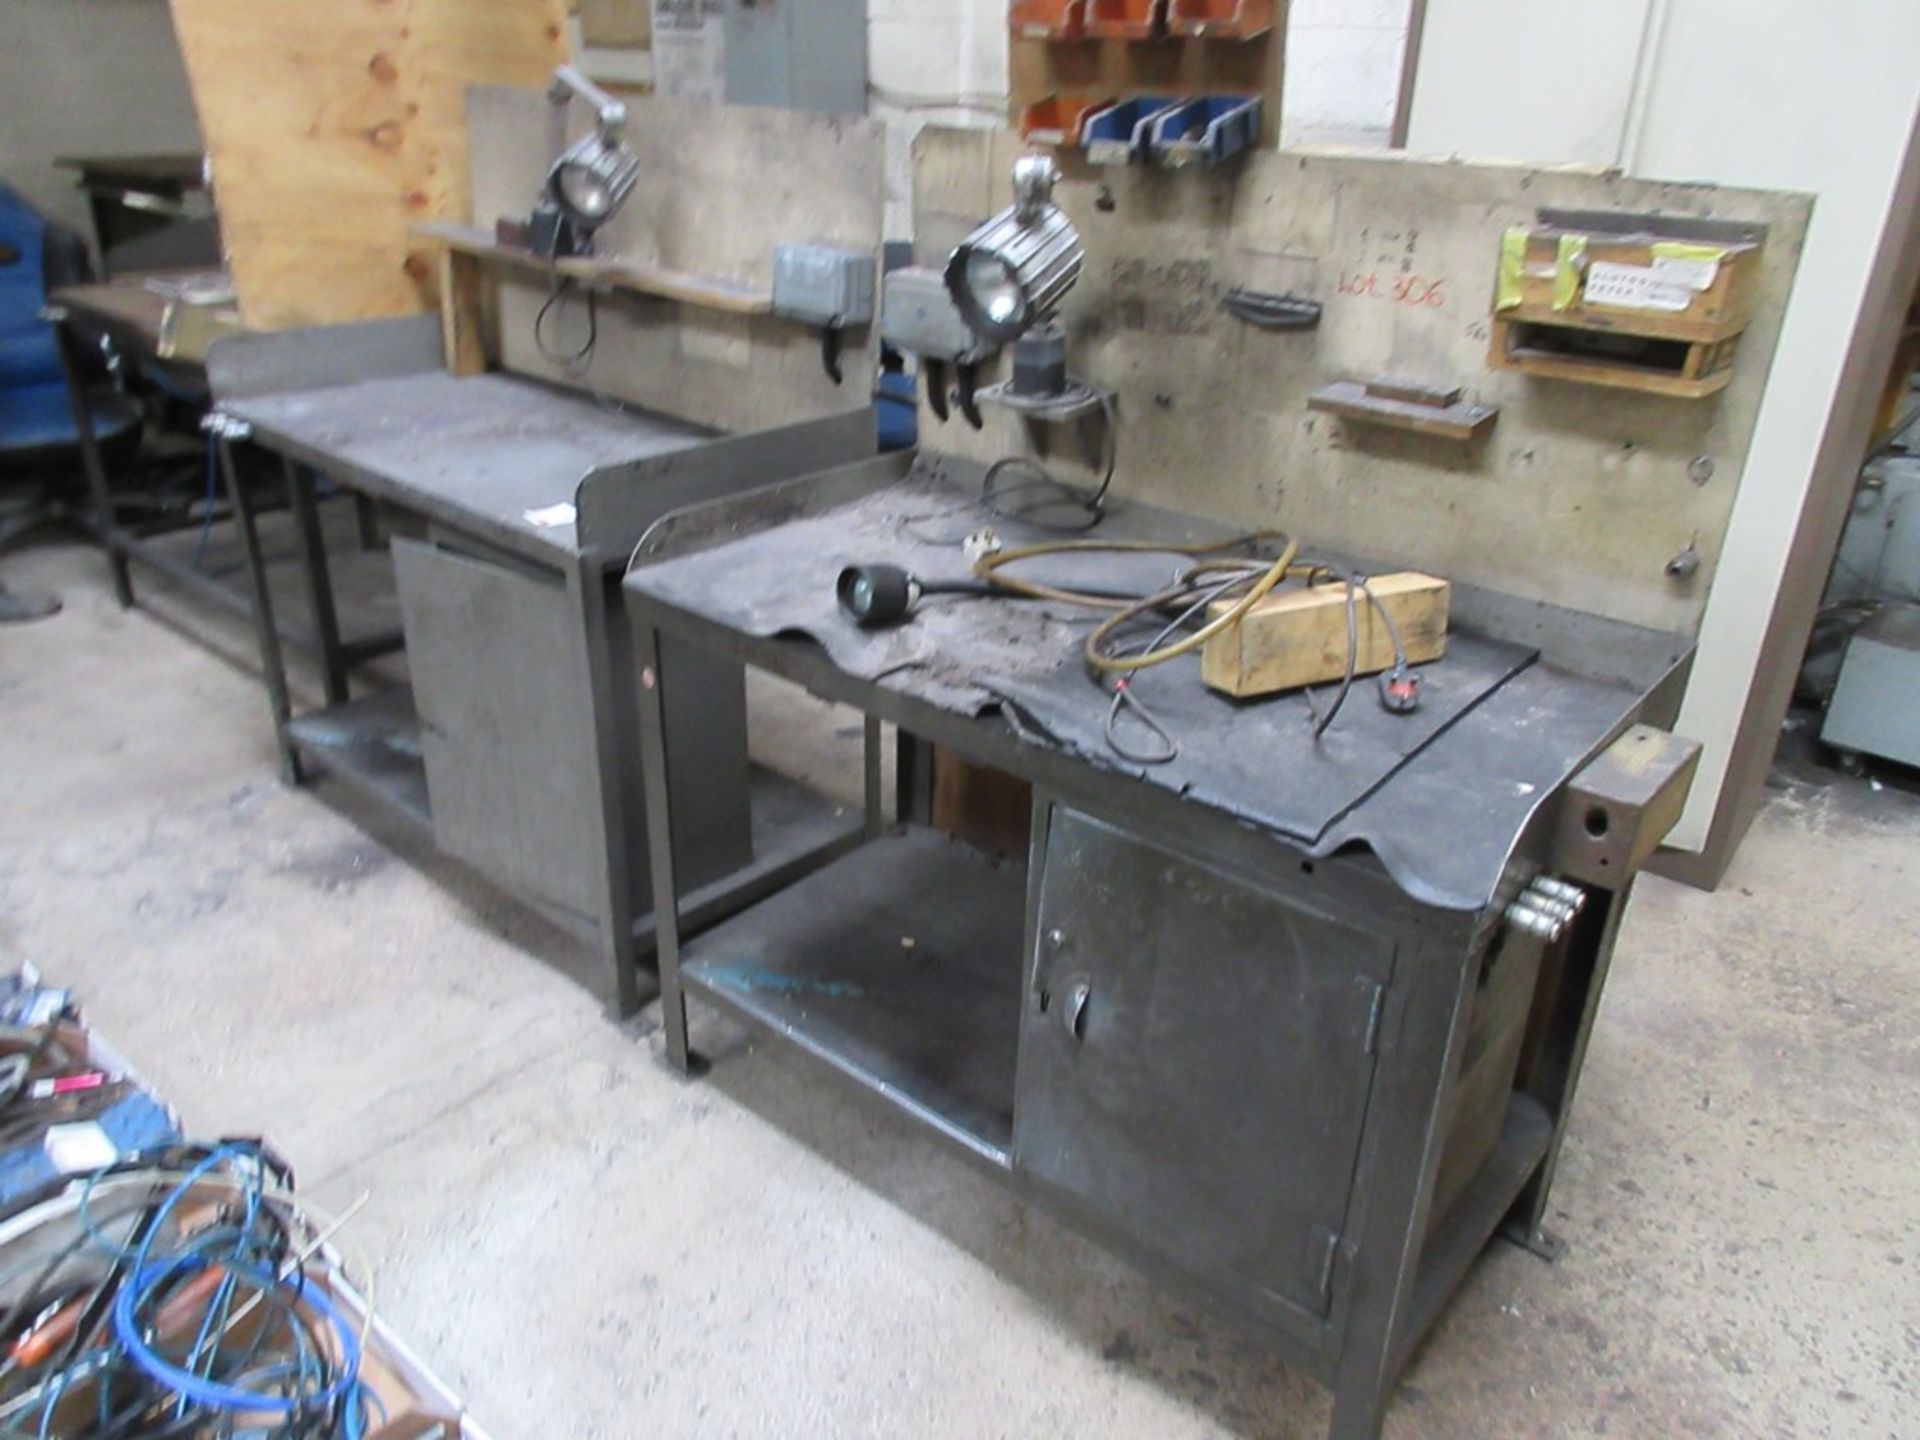 Two metal frame workbenches